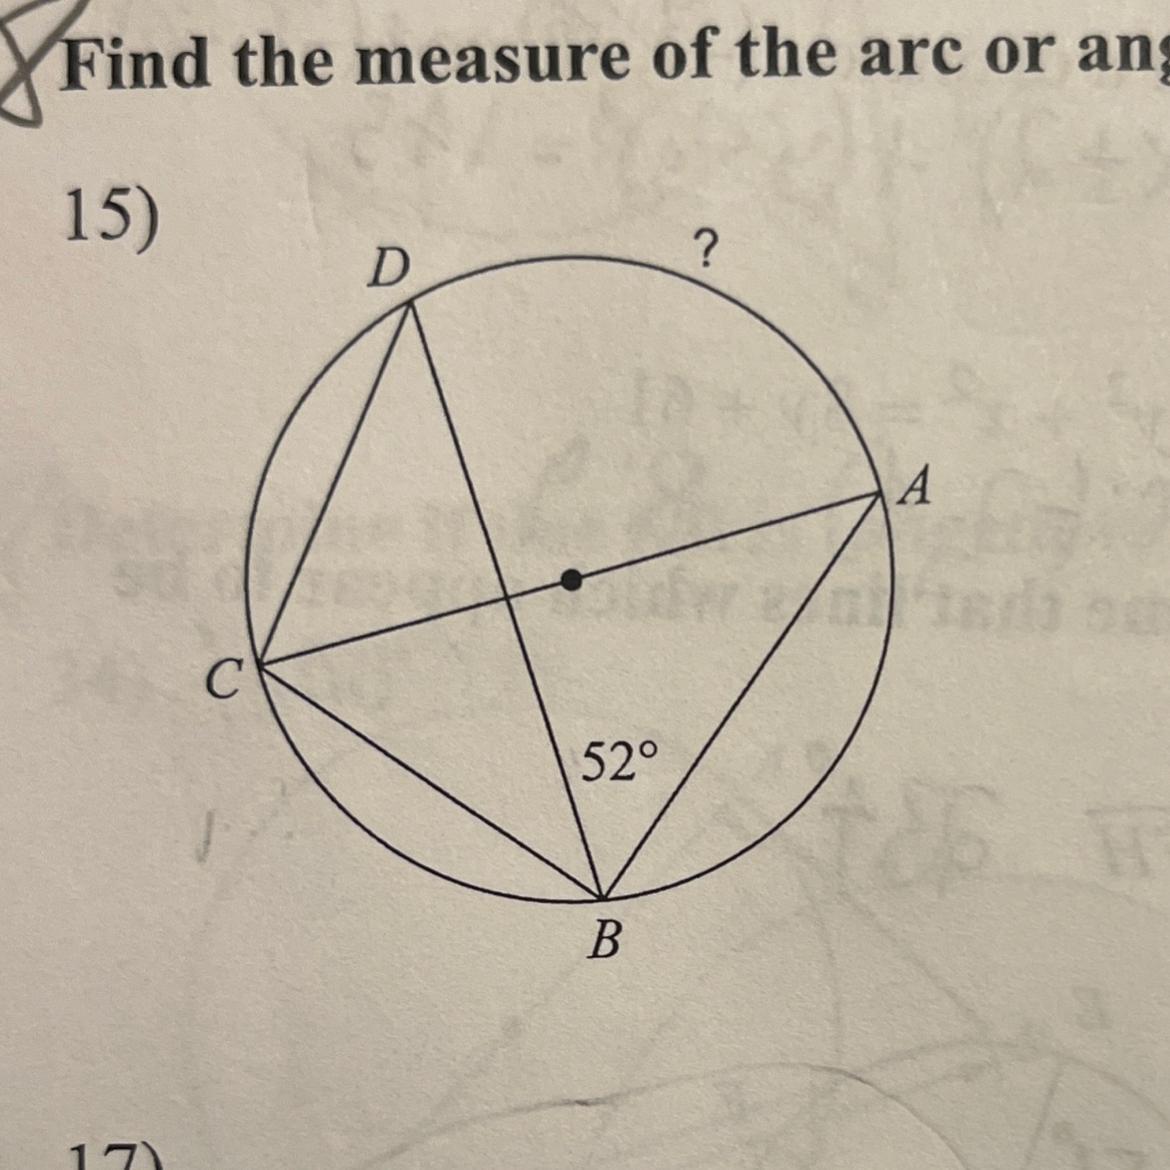 Find The Measure Of The Arc Or Angle Indicated.